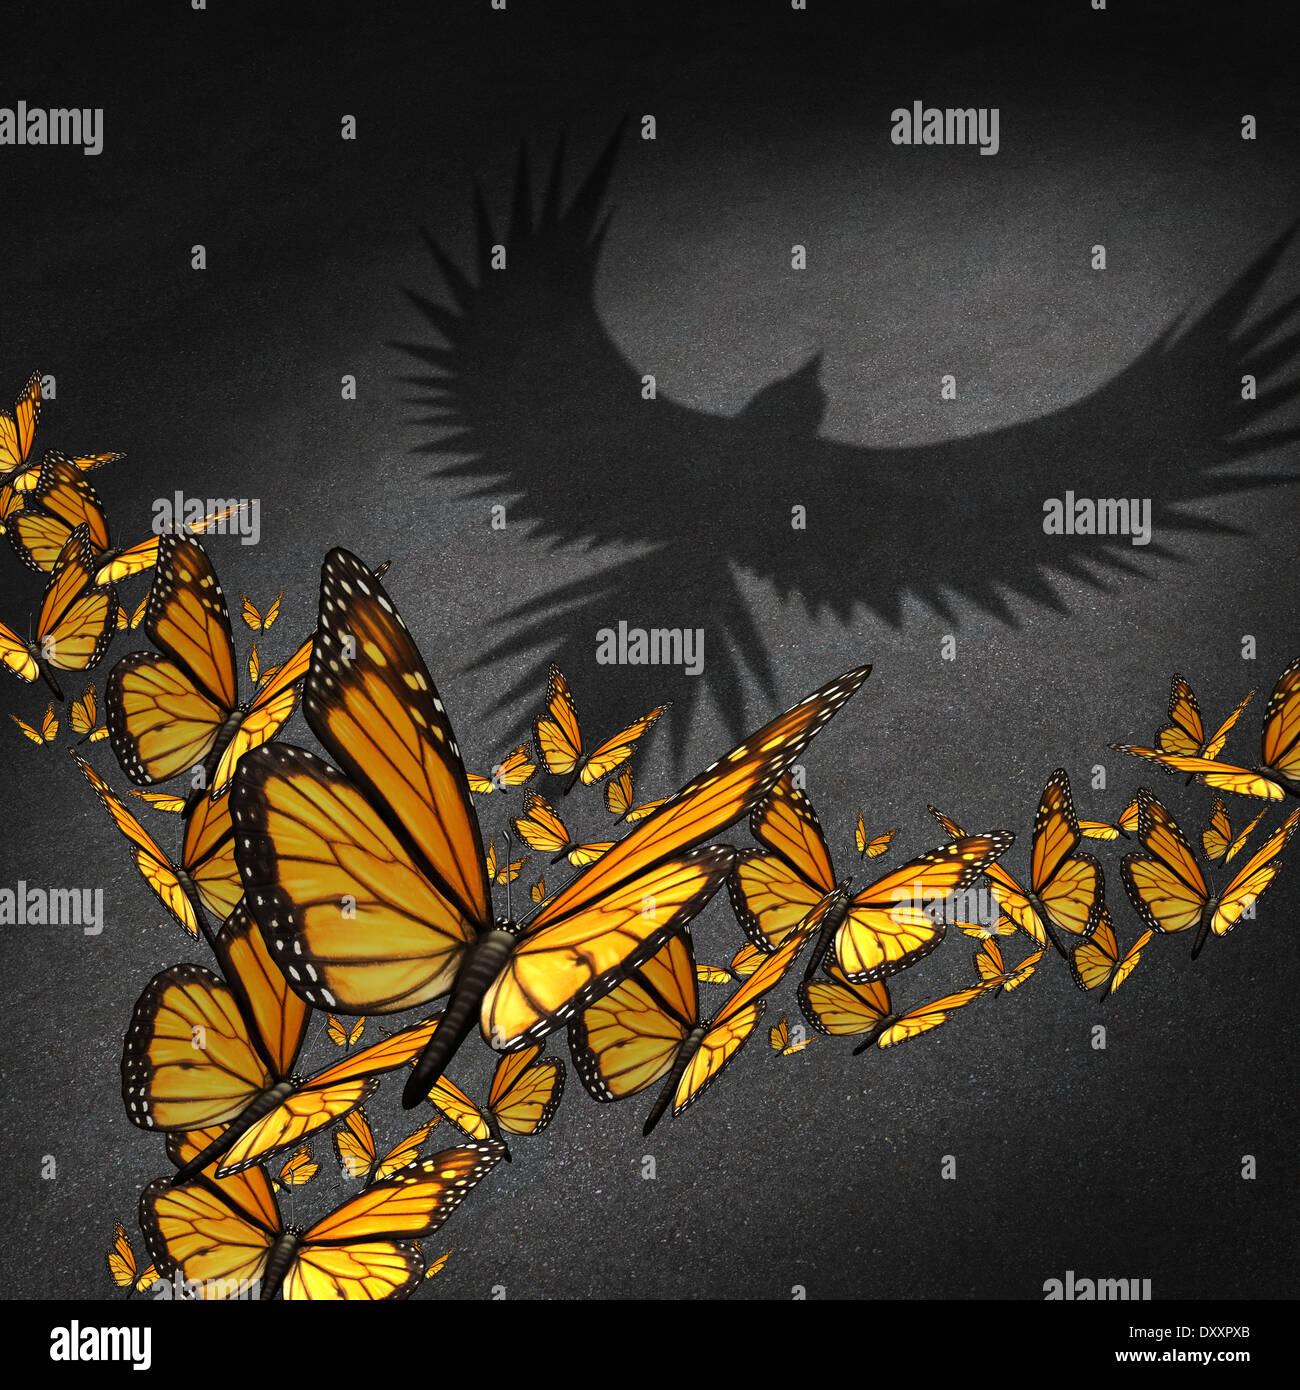 Power of teamwork business concept as a group of monarch butterflies getting together to cast a shadow of a strong eagle as a metaphor for partnership communication success through network connections cooperation. Stock Photo